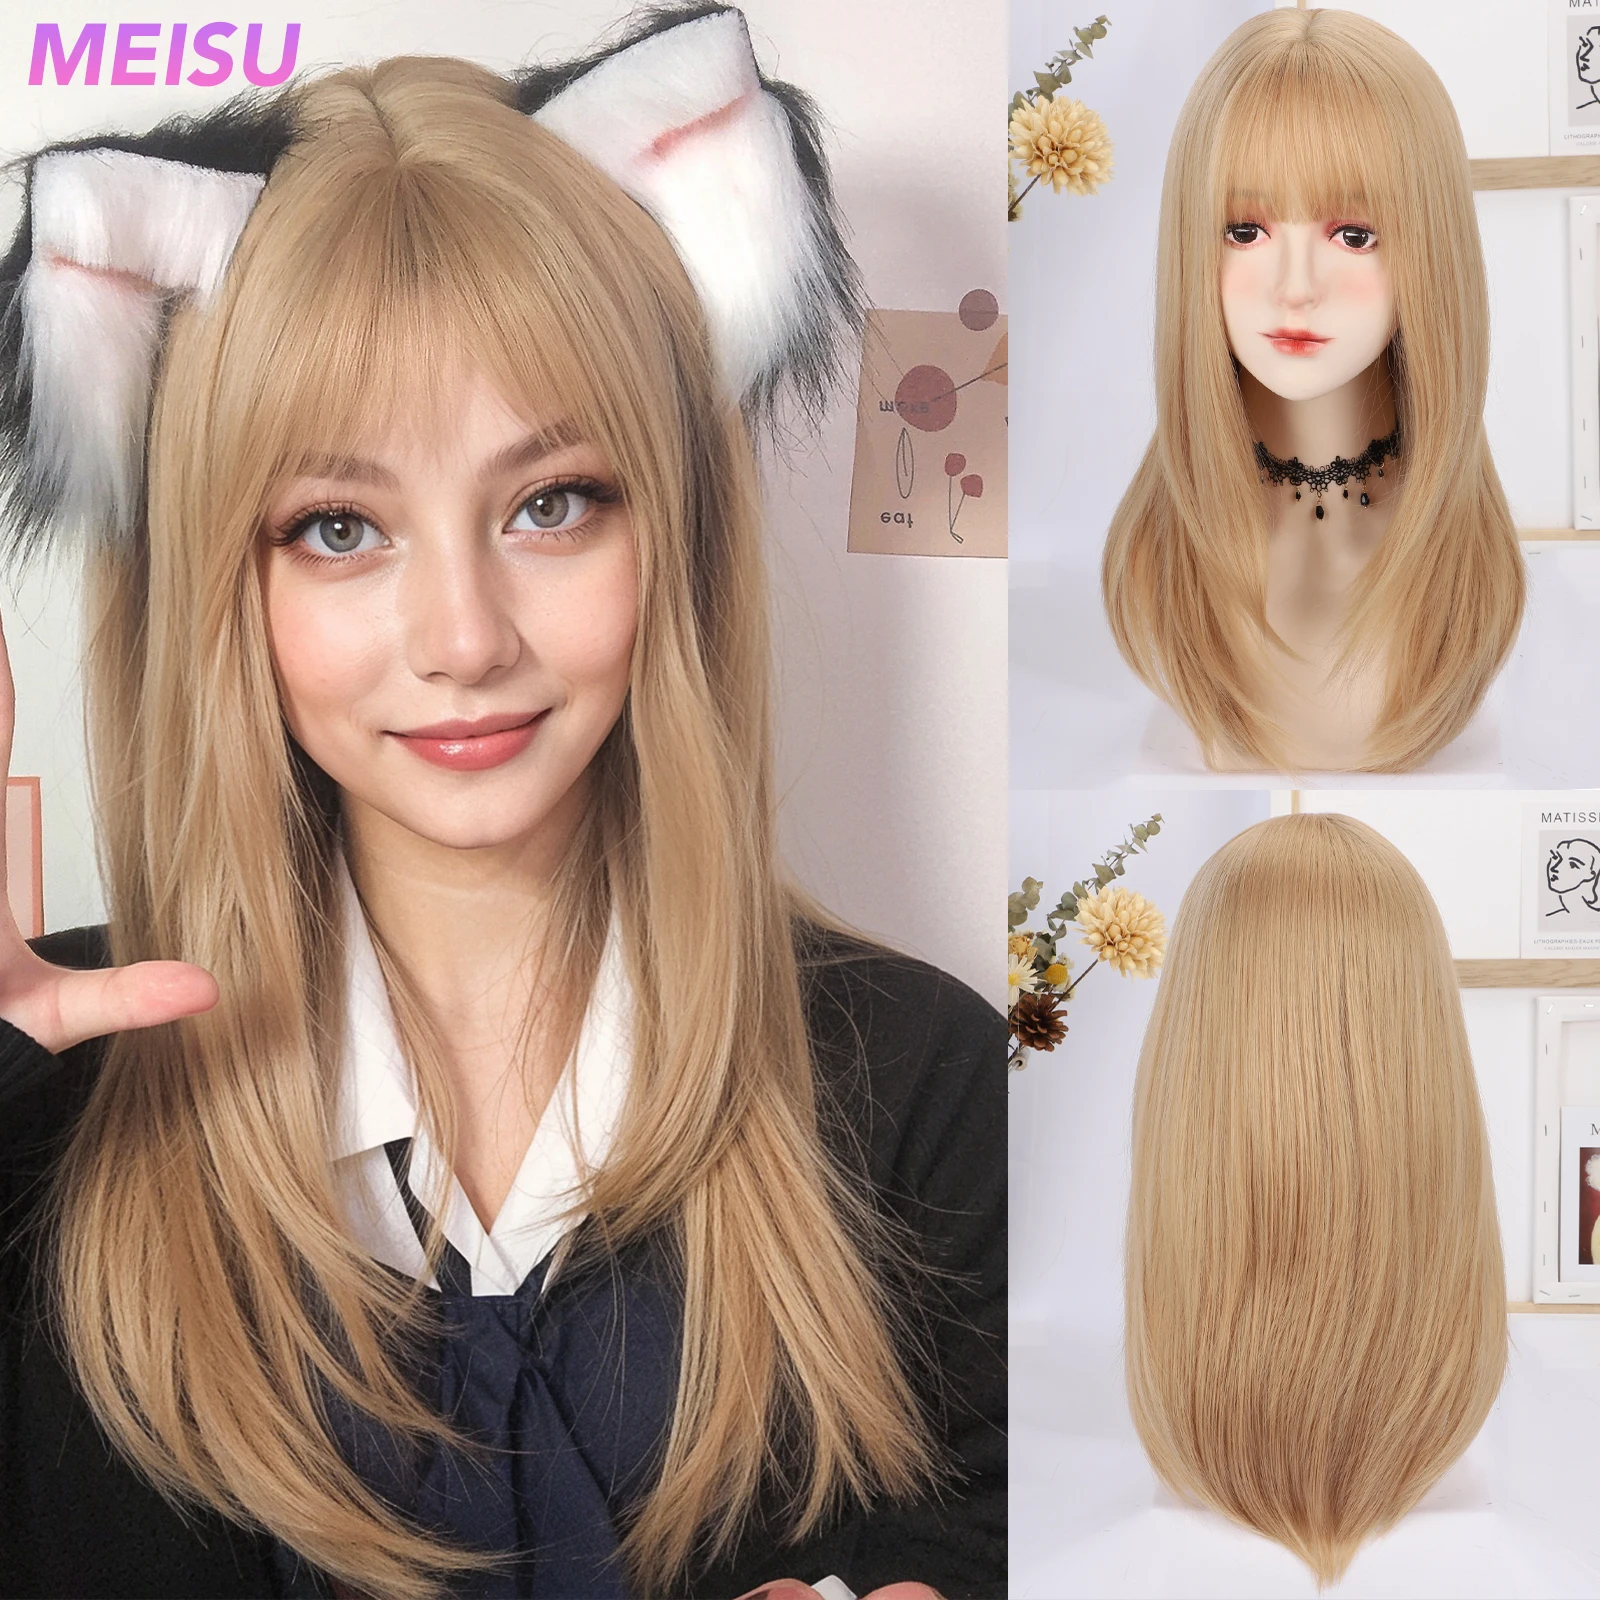 

MEISU 22 Inch Long Straight Bangs Wig Fiber Synthetic Wig Heat-resistant Non-Glare Natural Cosplay Hairpiece For Women Daily Use